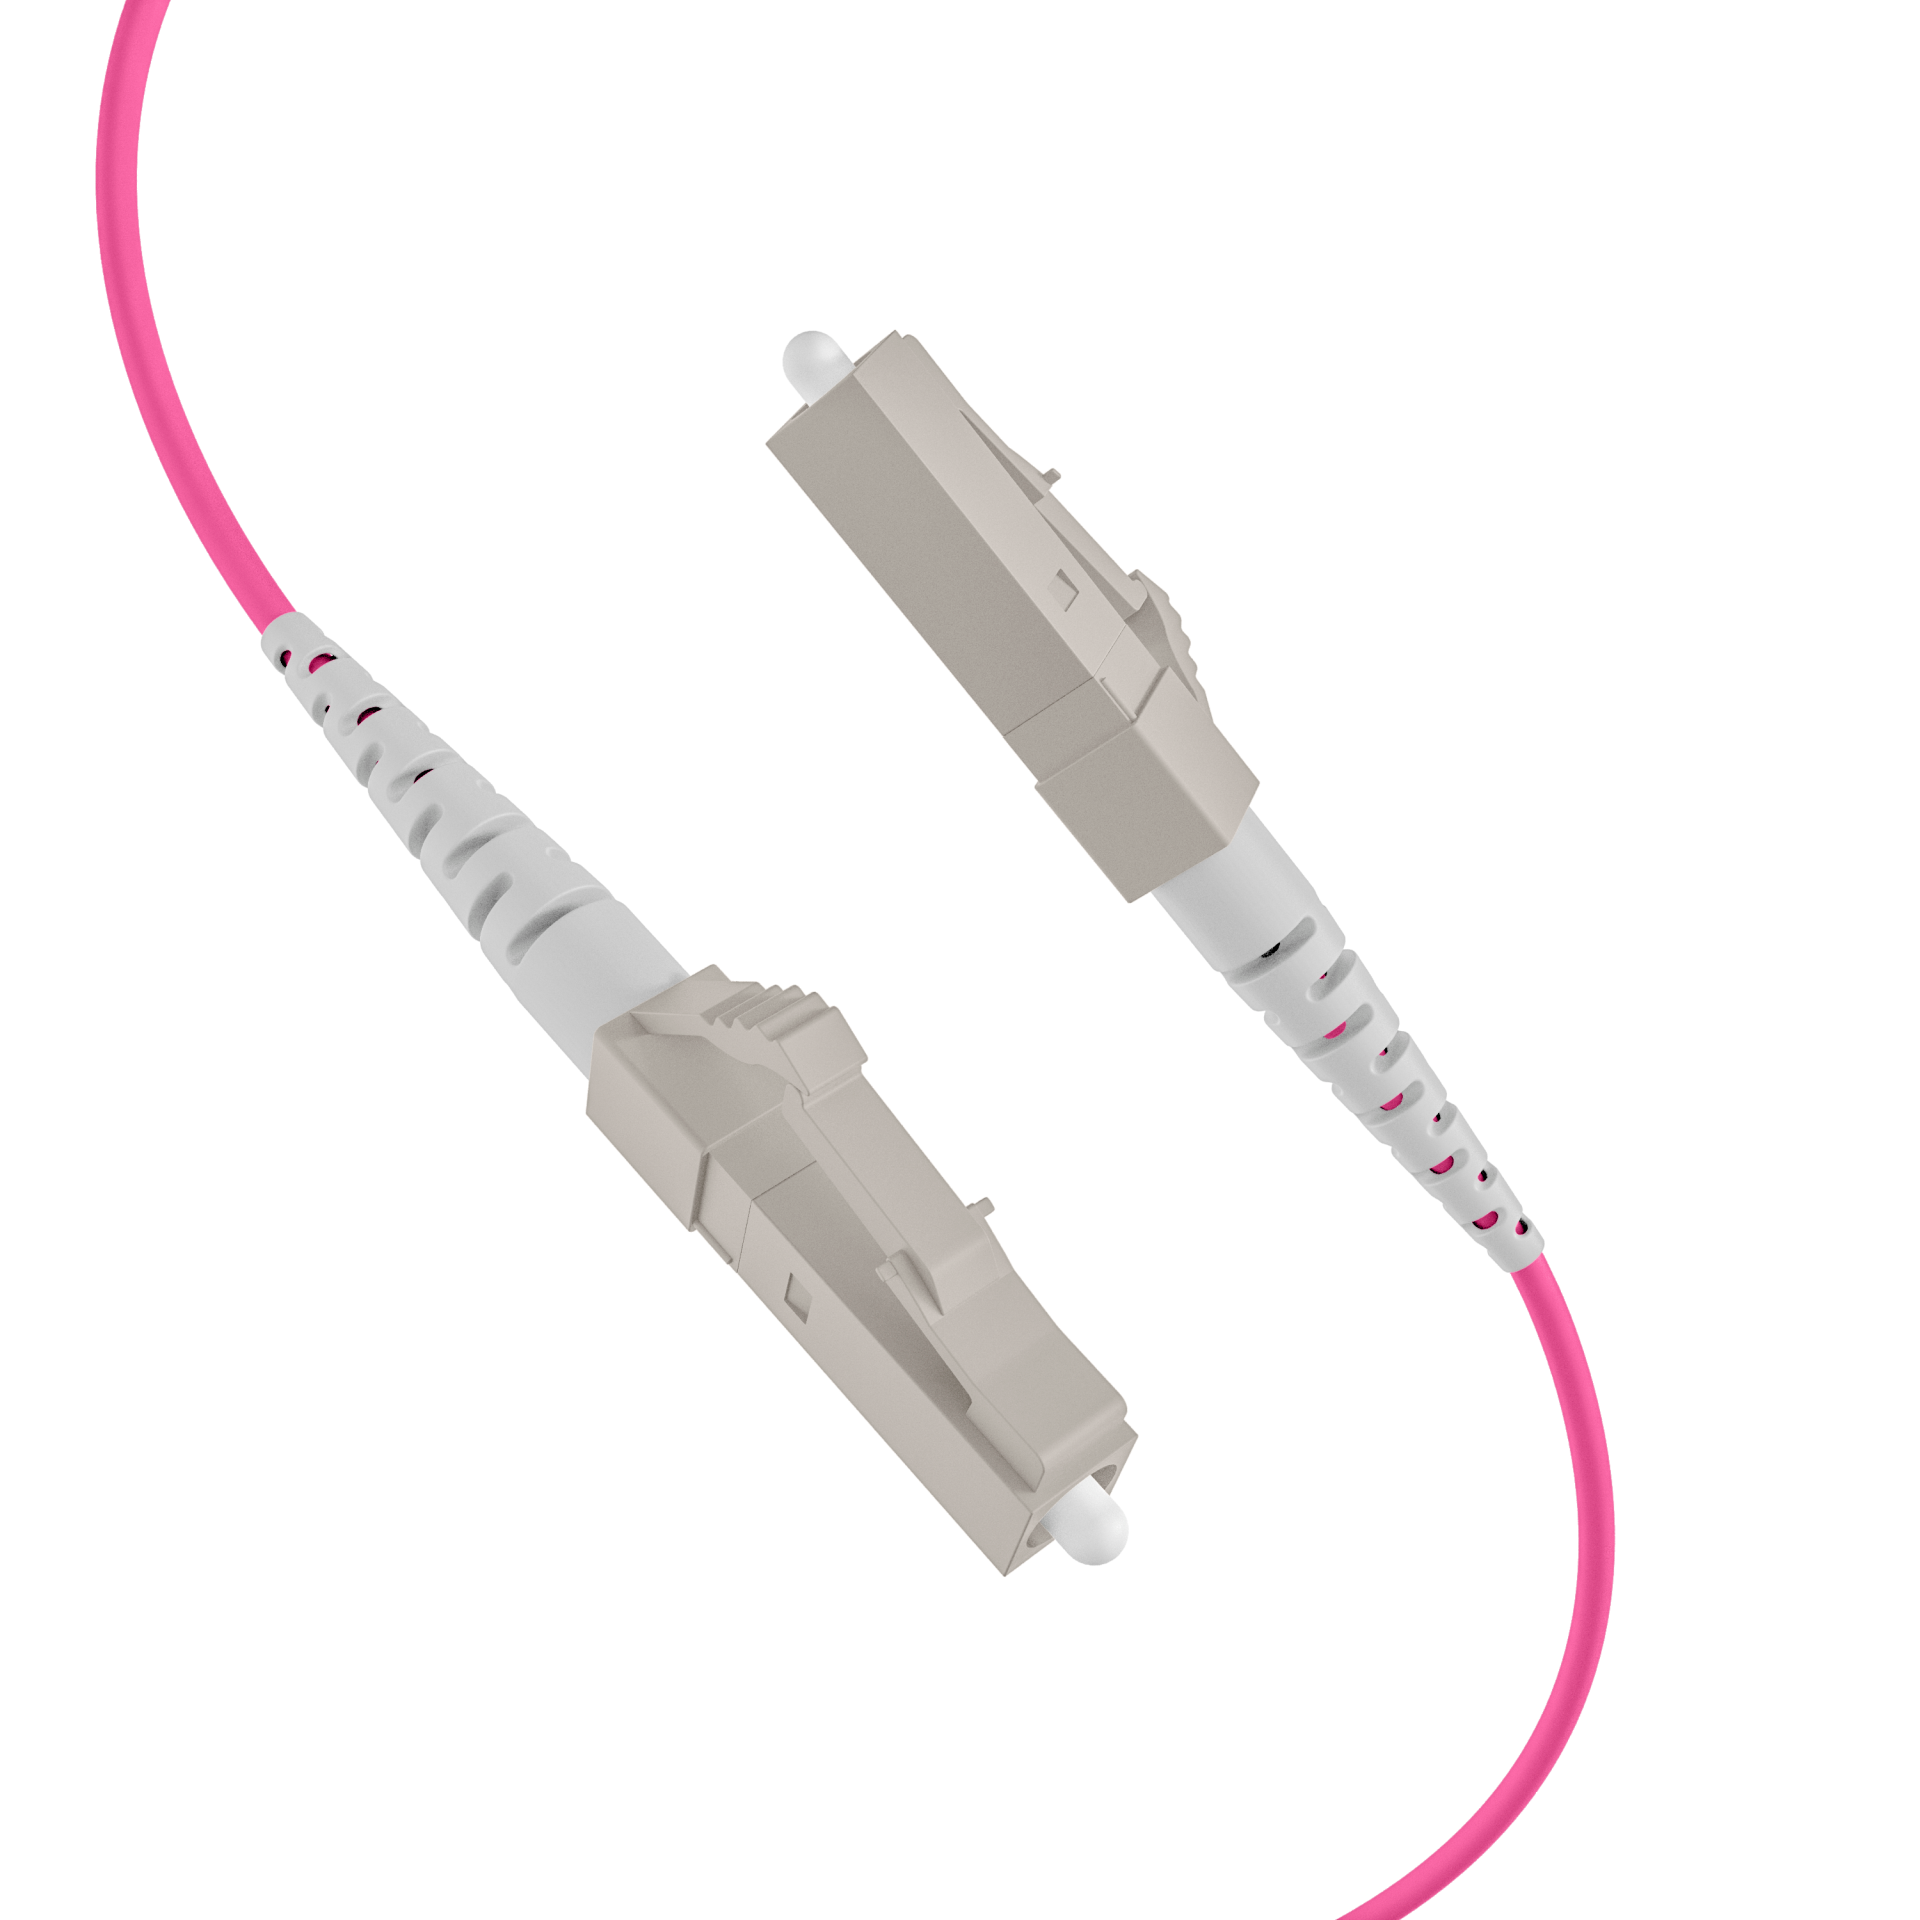 Trunkcable U-DQ(ZN)BH OM4 8G (1x8) LC-LC,70m Dca LSZH